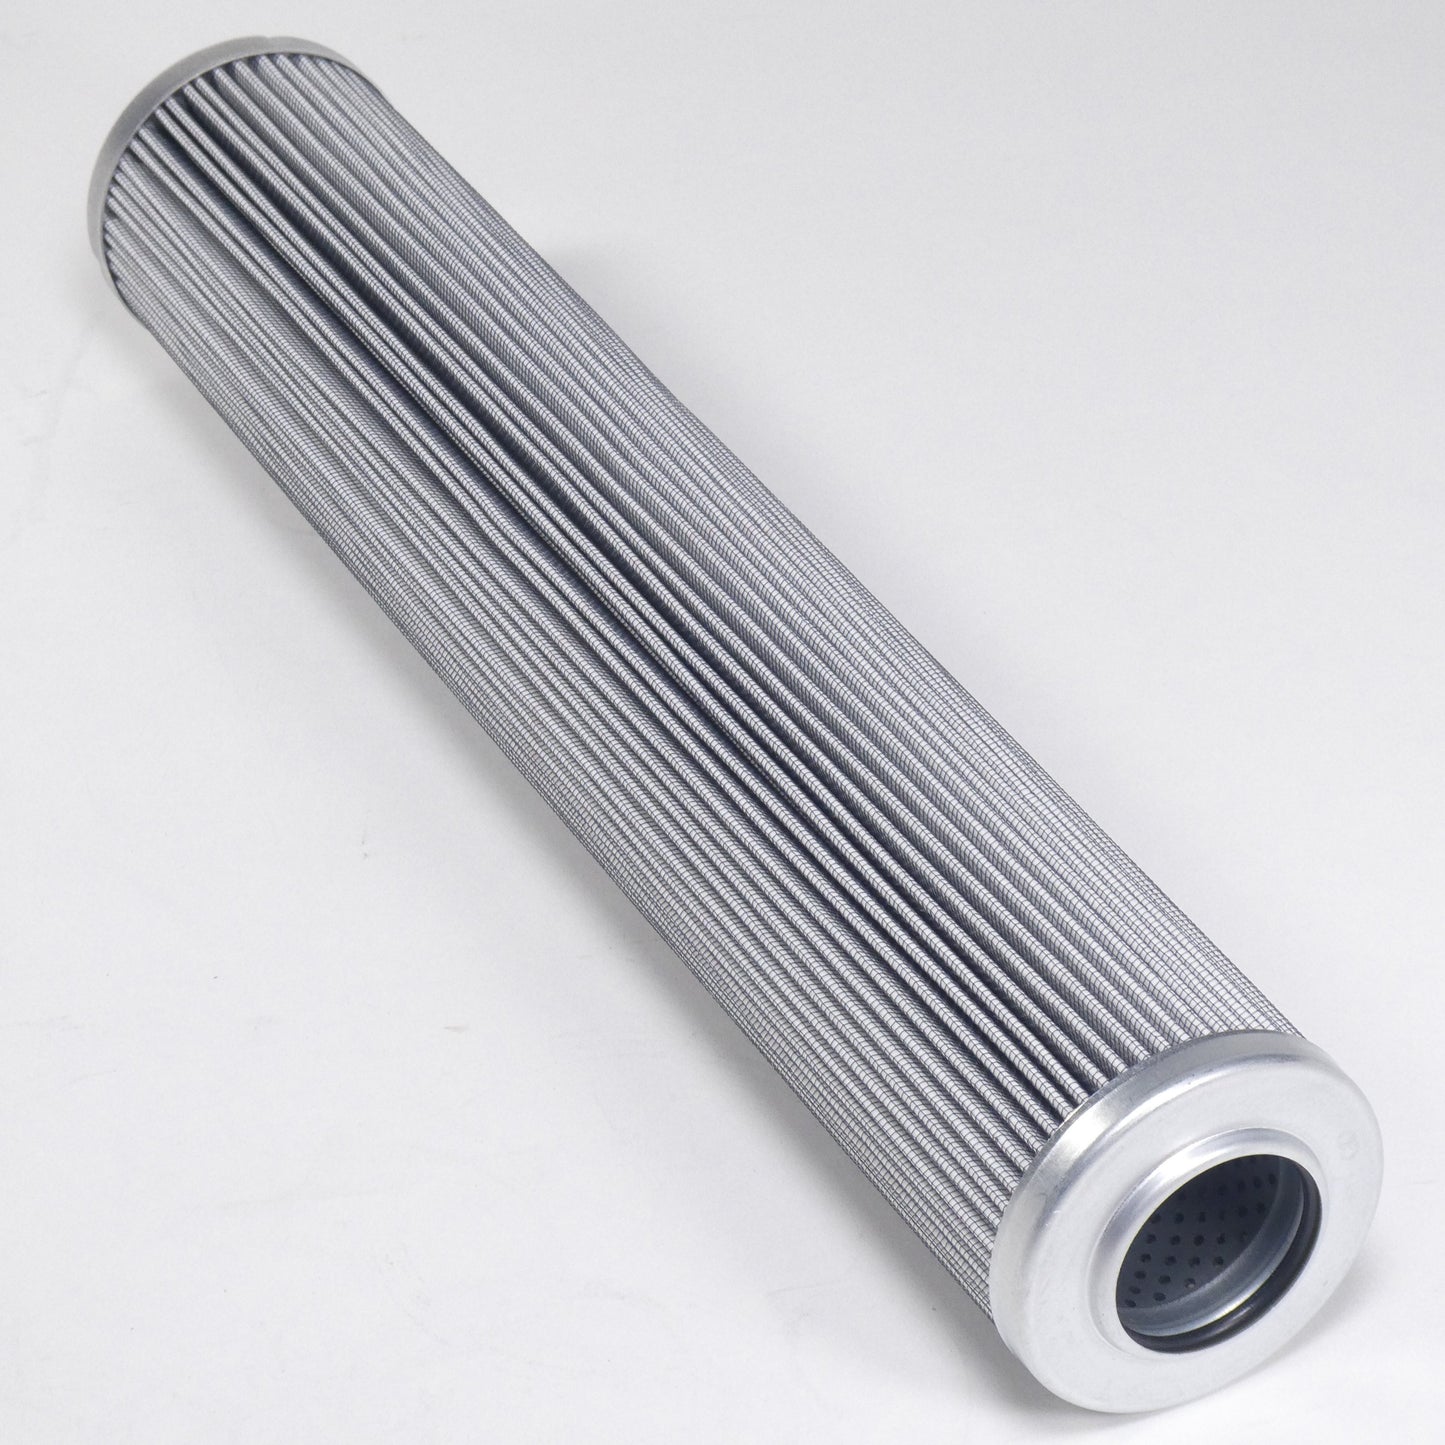 Hydrafil Replacement Filter Element for Western 51684